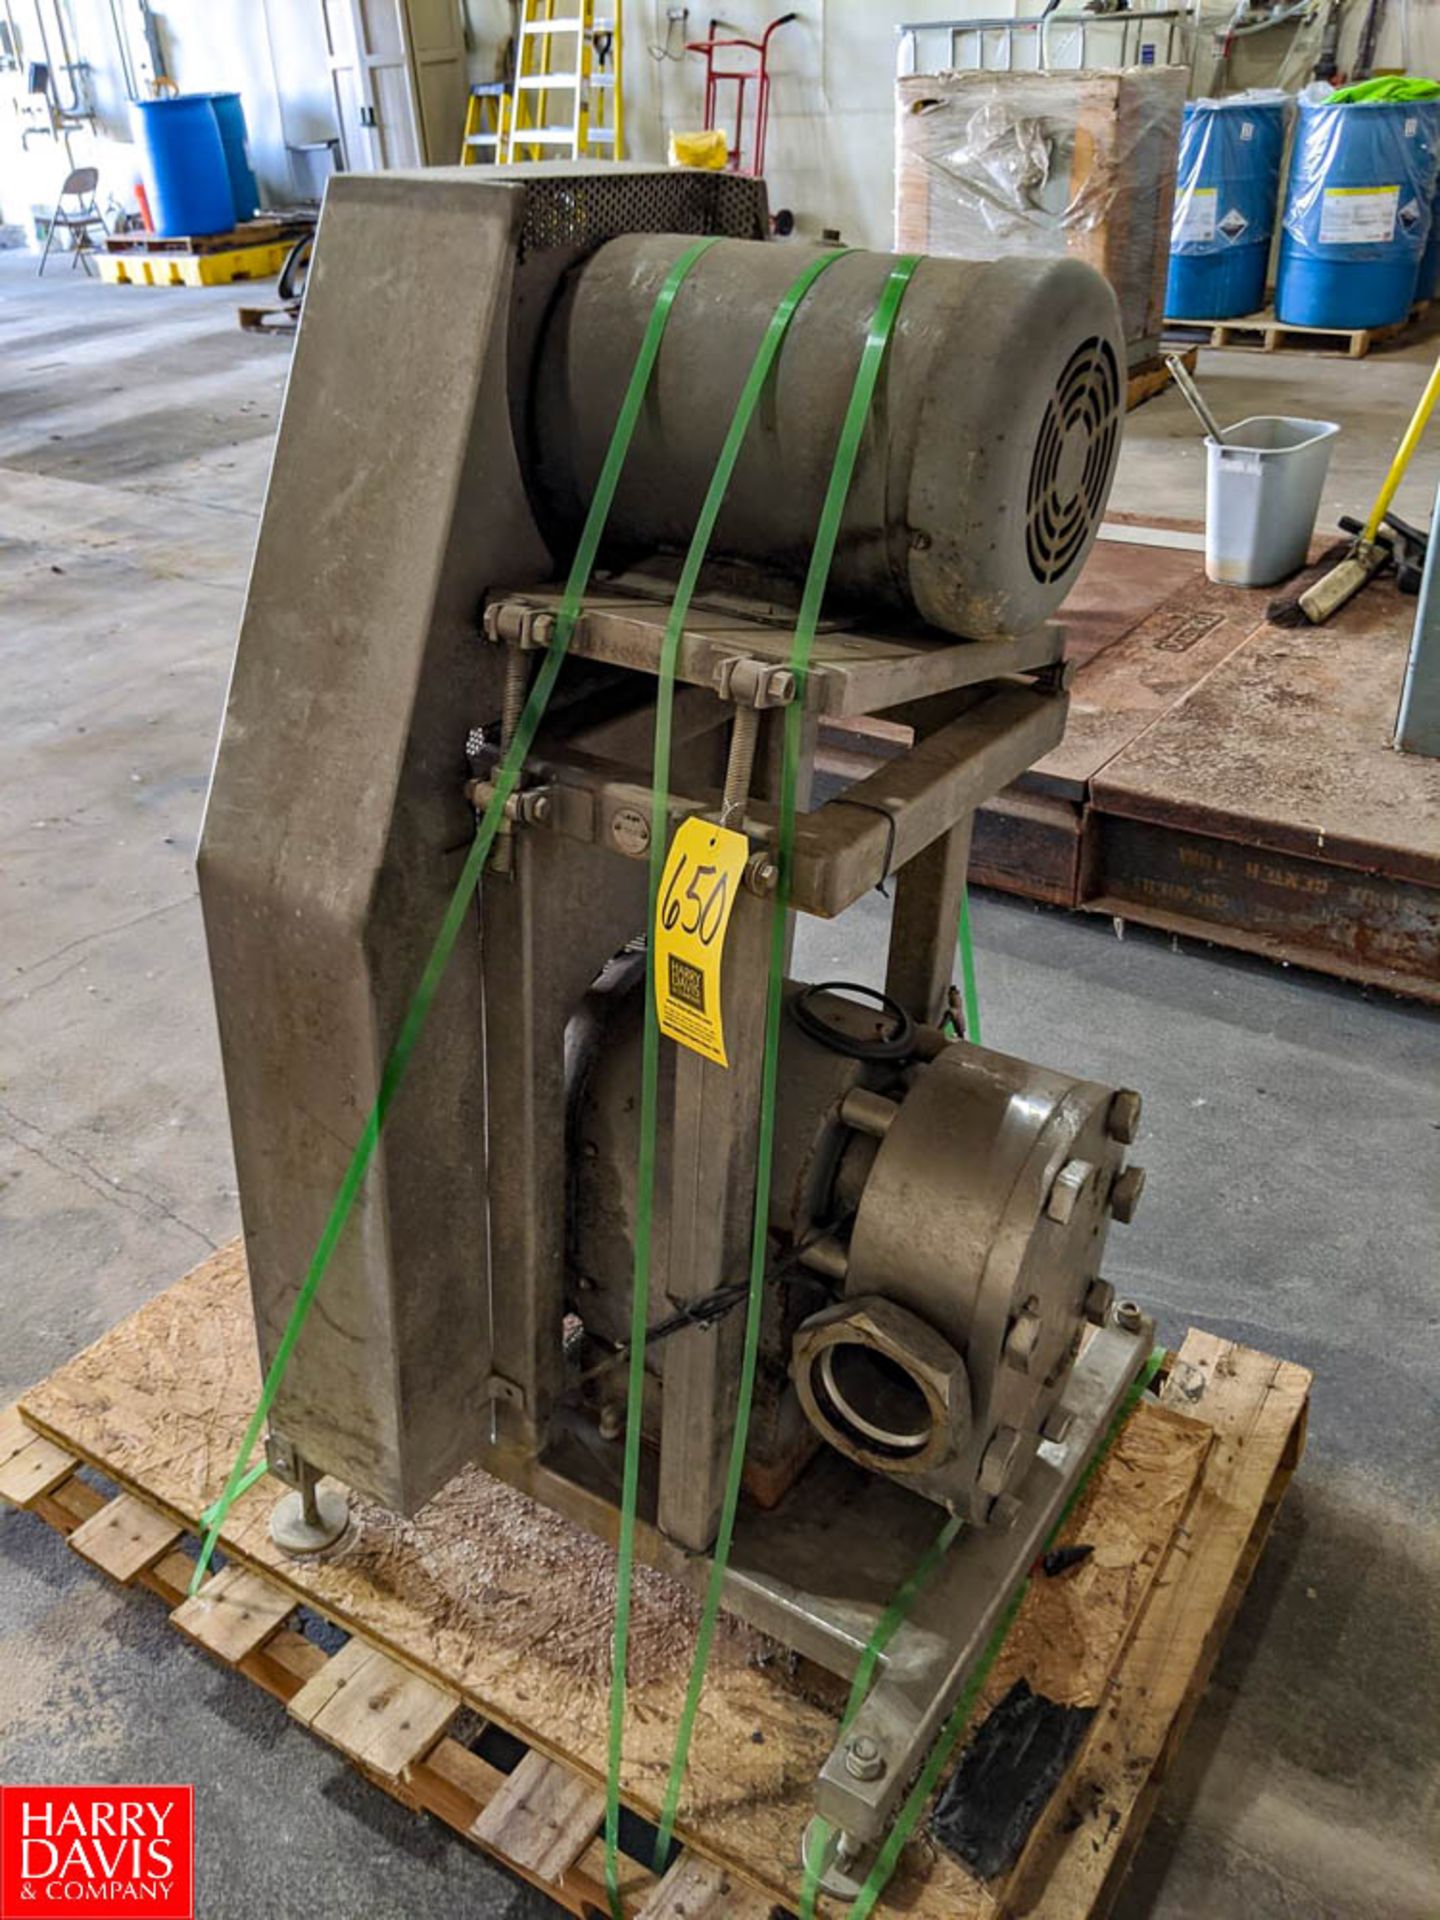 10 HP S/S Rotary Pump (Loc. Wash House) Rigging Fee: $150